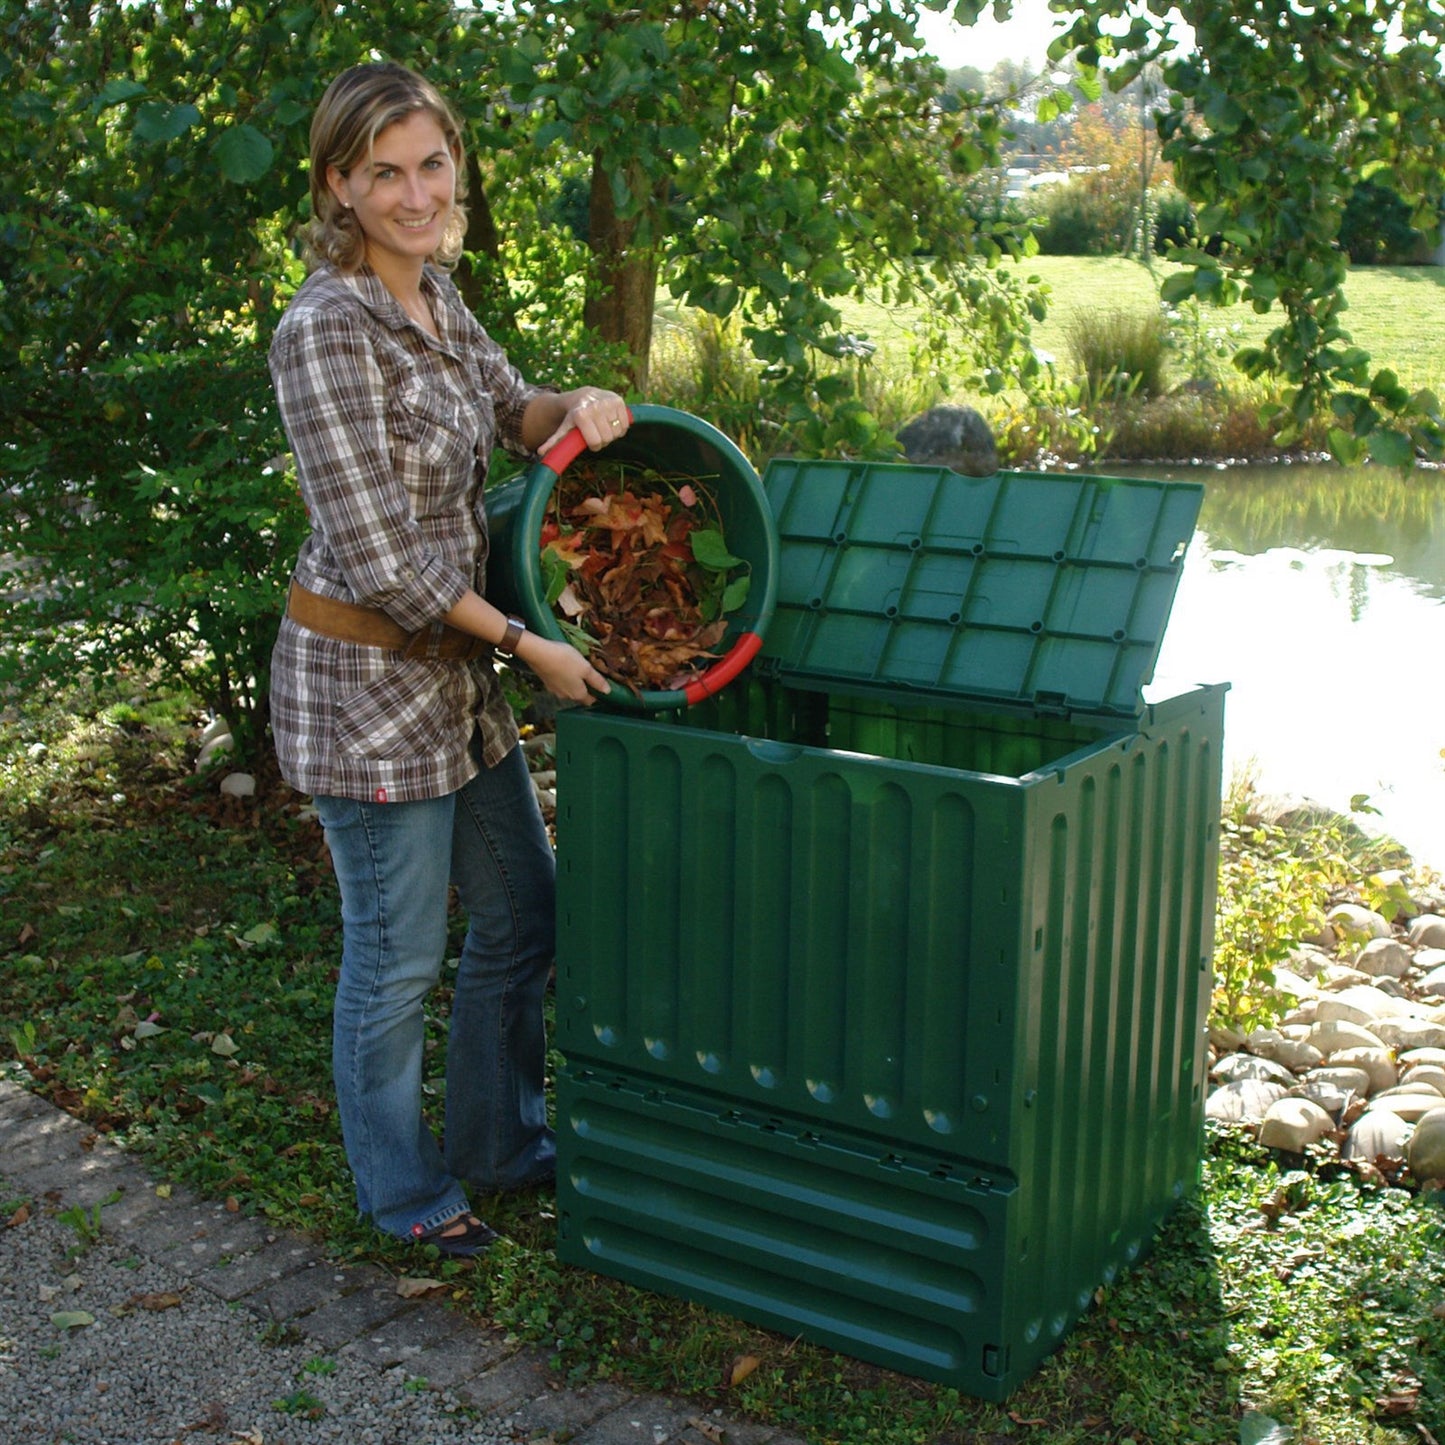 Outdoor Composting 110-Gallon Composter Recycle Plastic Compost Bin - Green